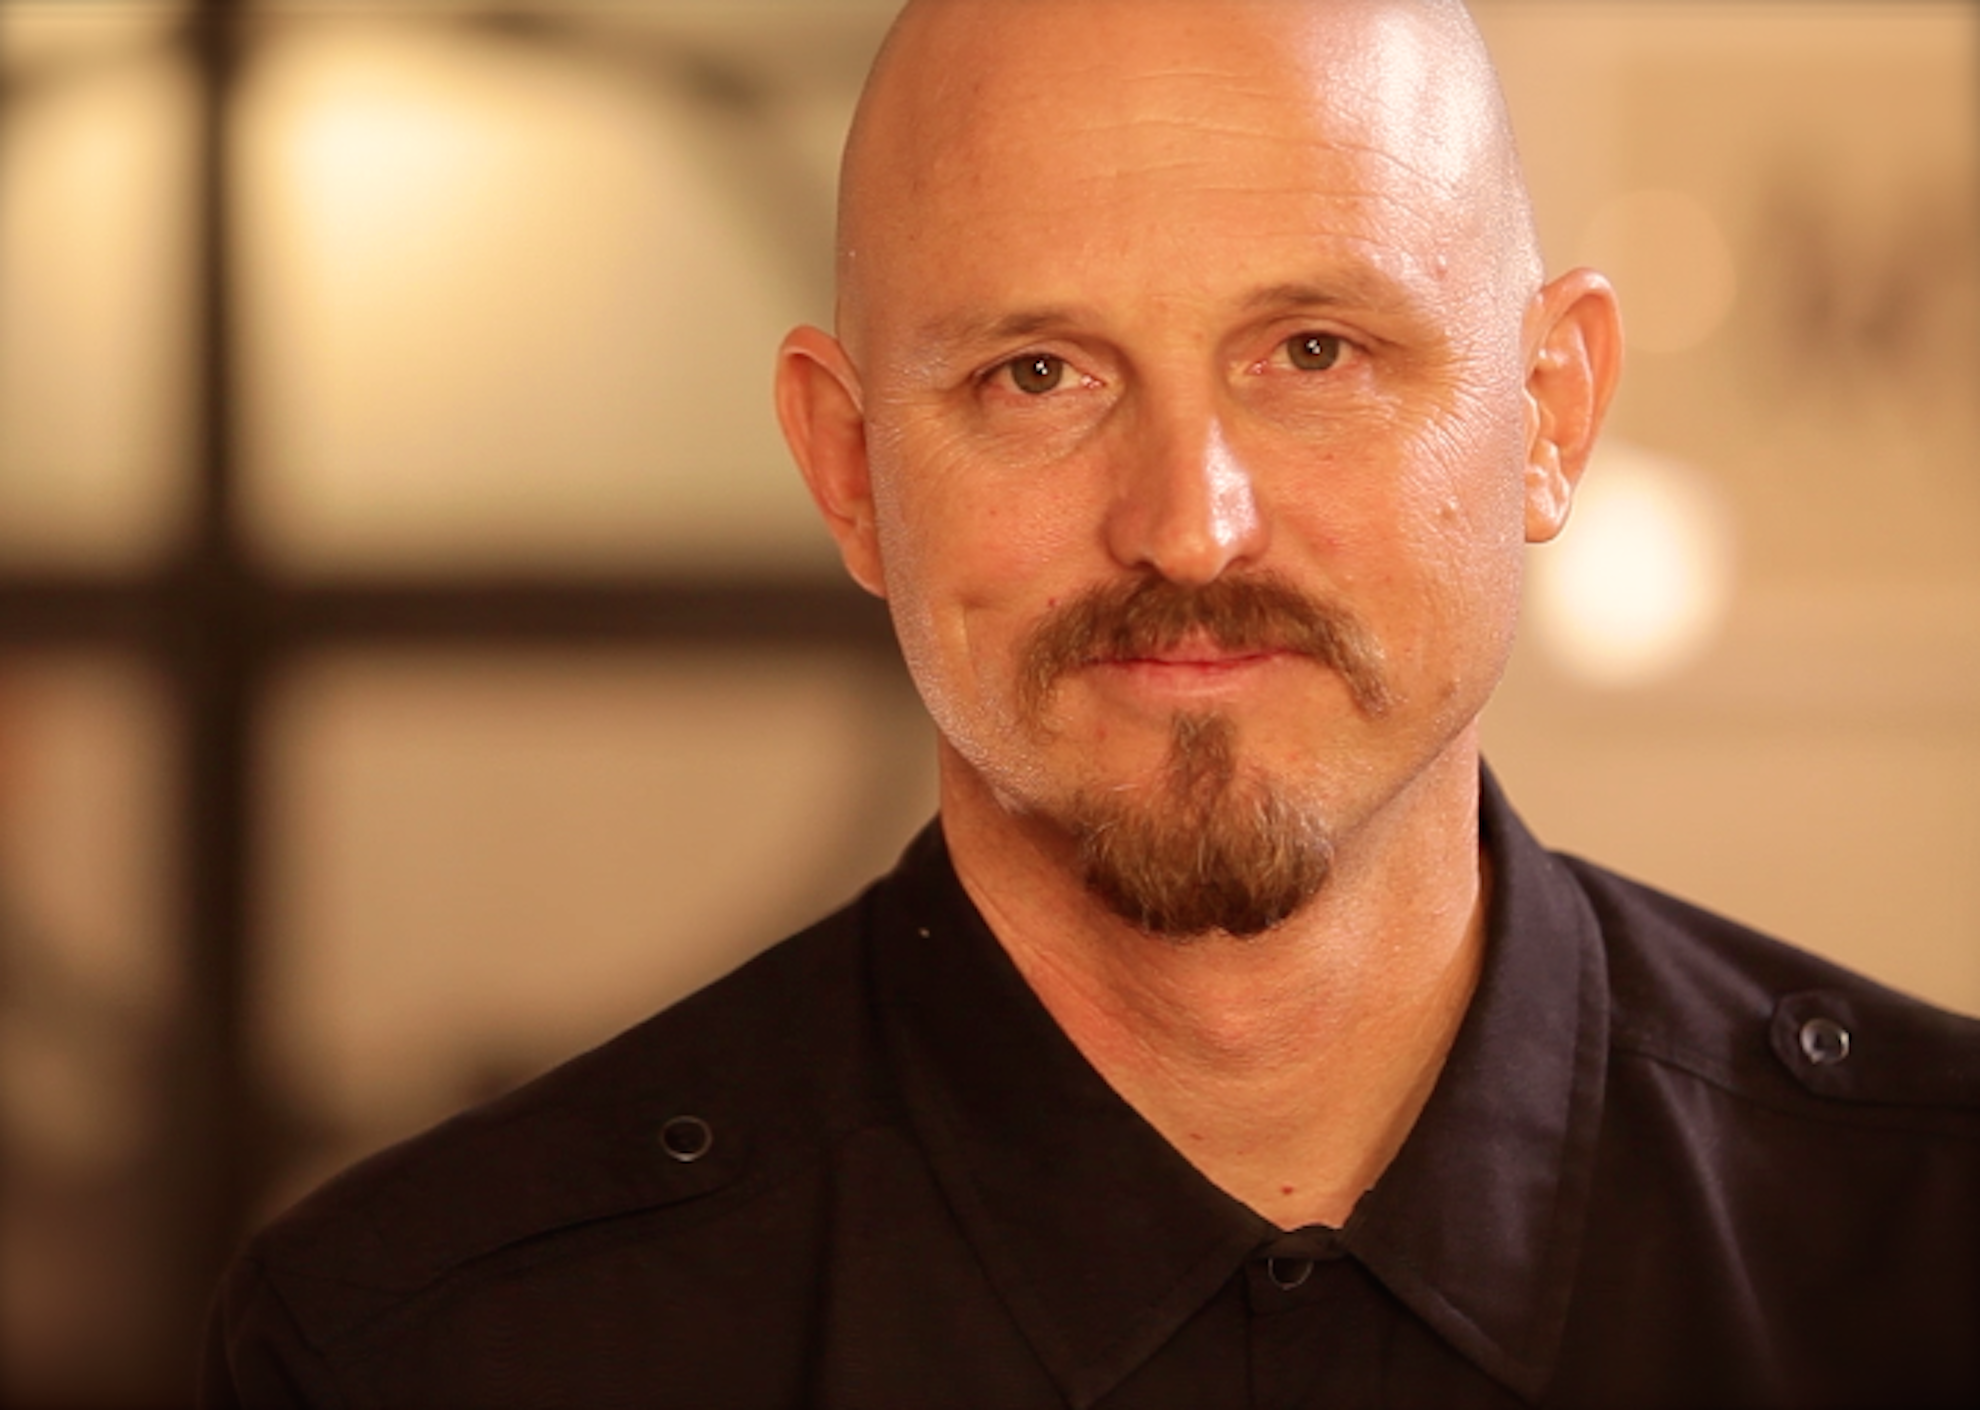 Mick Ebeling is founder of Not Impossible Labs, an organization responsible for breakthroughs in rehabilitative technology. He received a Burke Award on June 16.